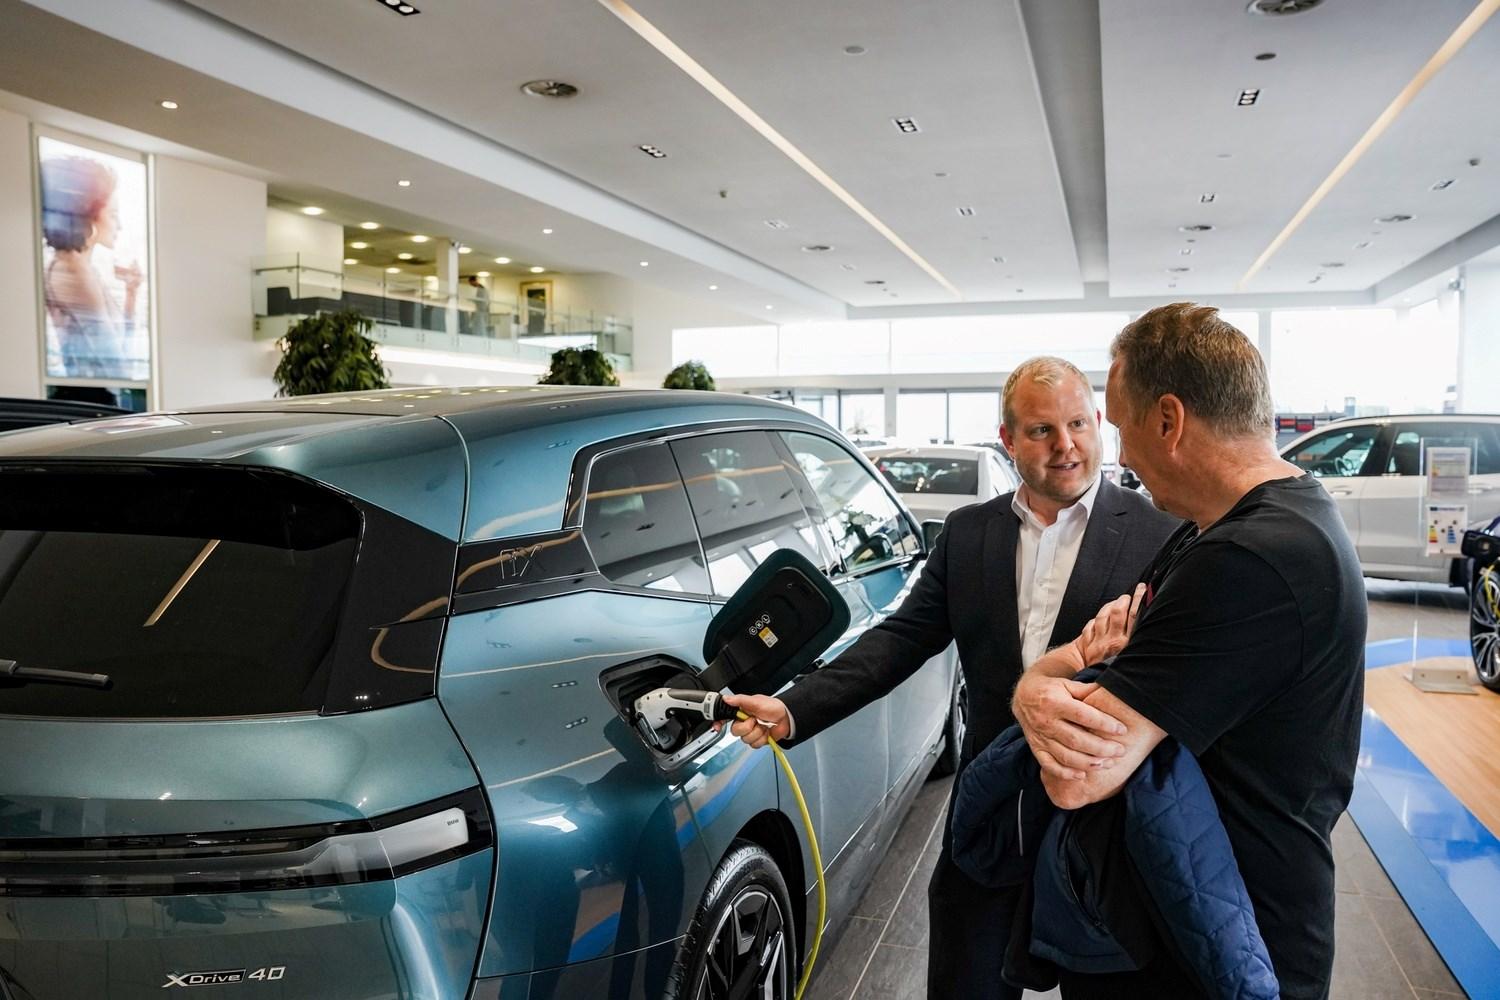 BMW Sales Manager talks to a customer about the benefits of going electric while demonstrating with a BMW iX at the Bavarian BMW showroom